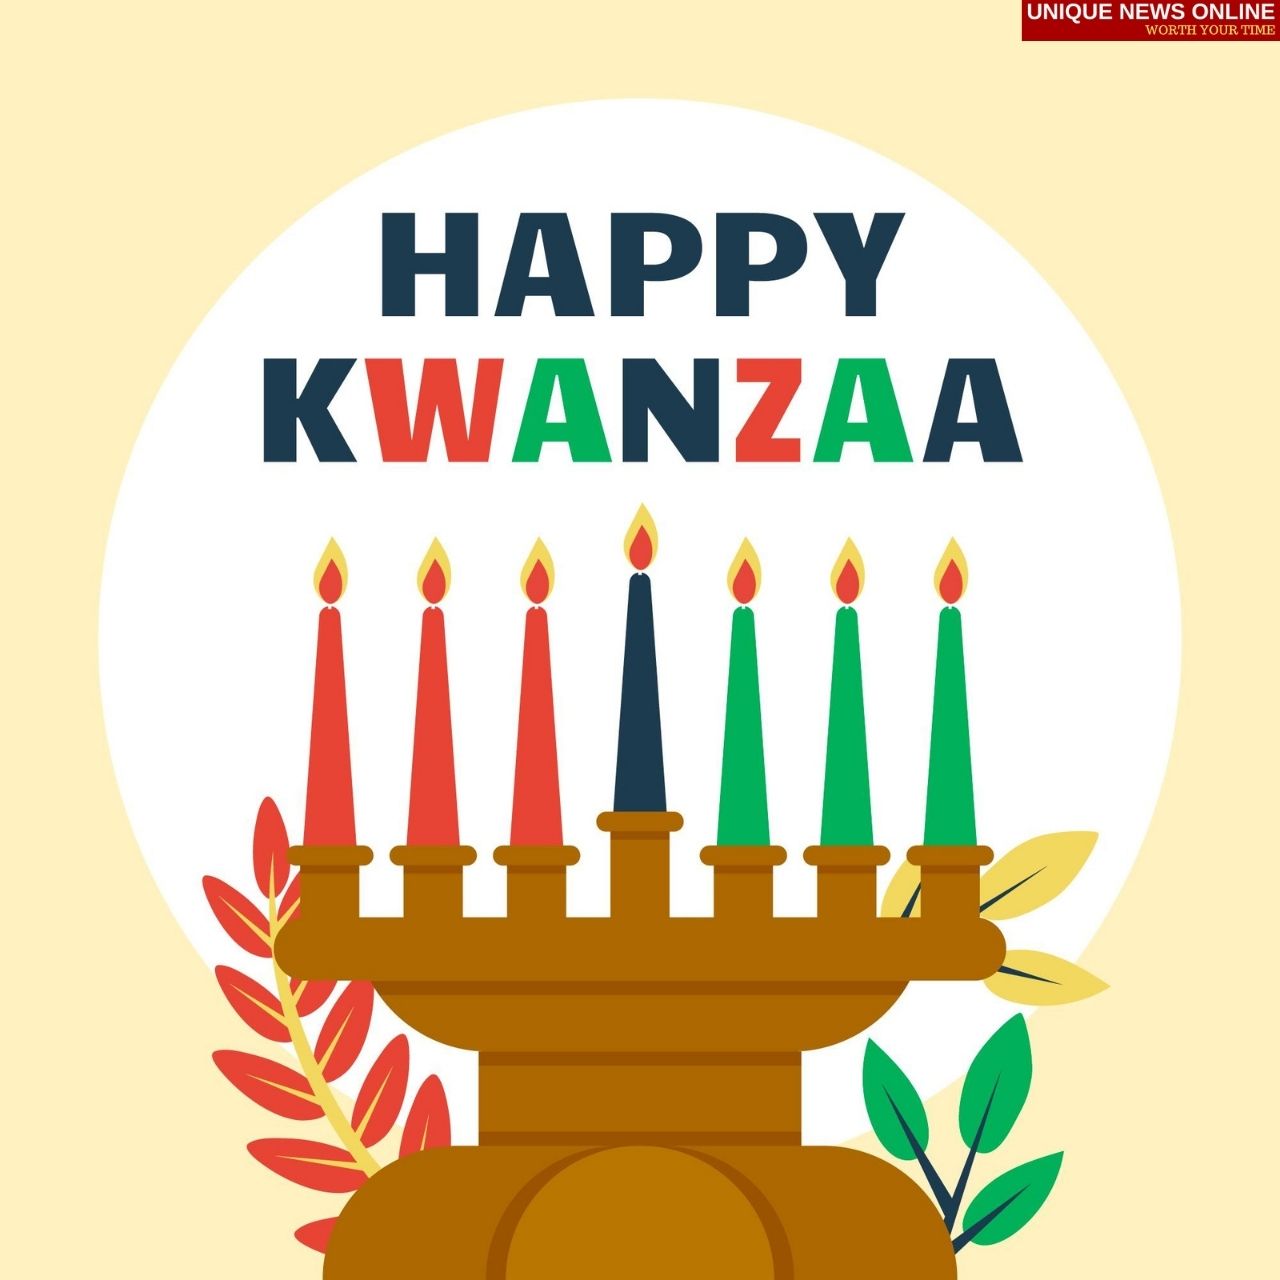 Kwanzaa 2021 Instagram Captions, Facebook Greetings, WhatsApp Images, Twitter Quotes, Memes, Stickers, and Gifs to share